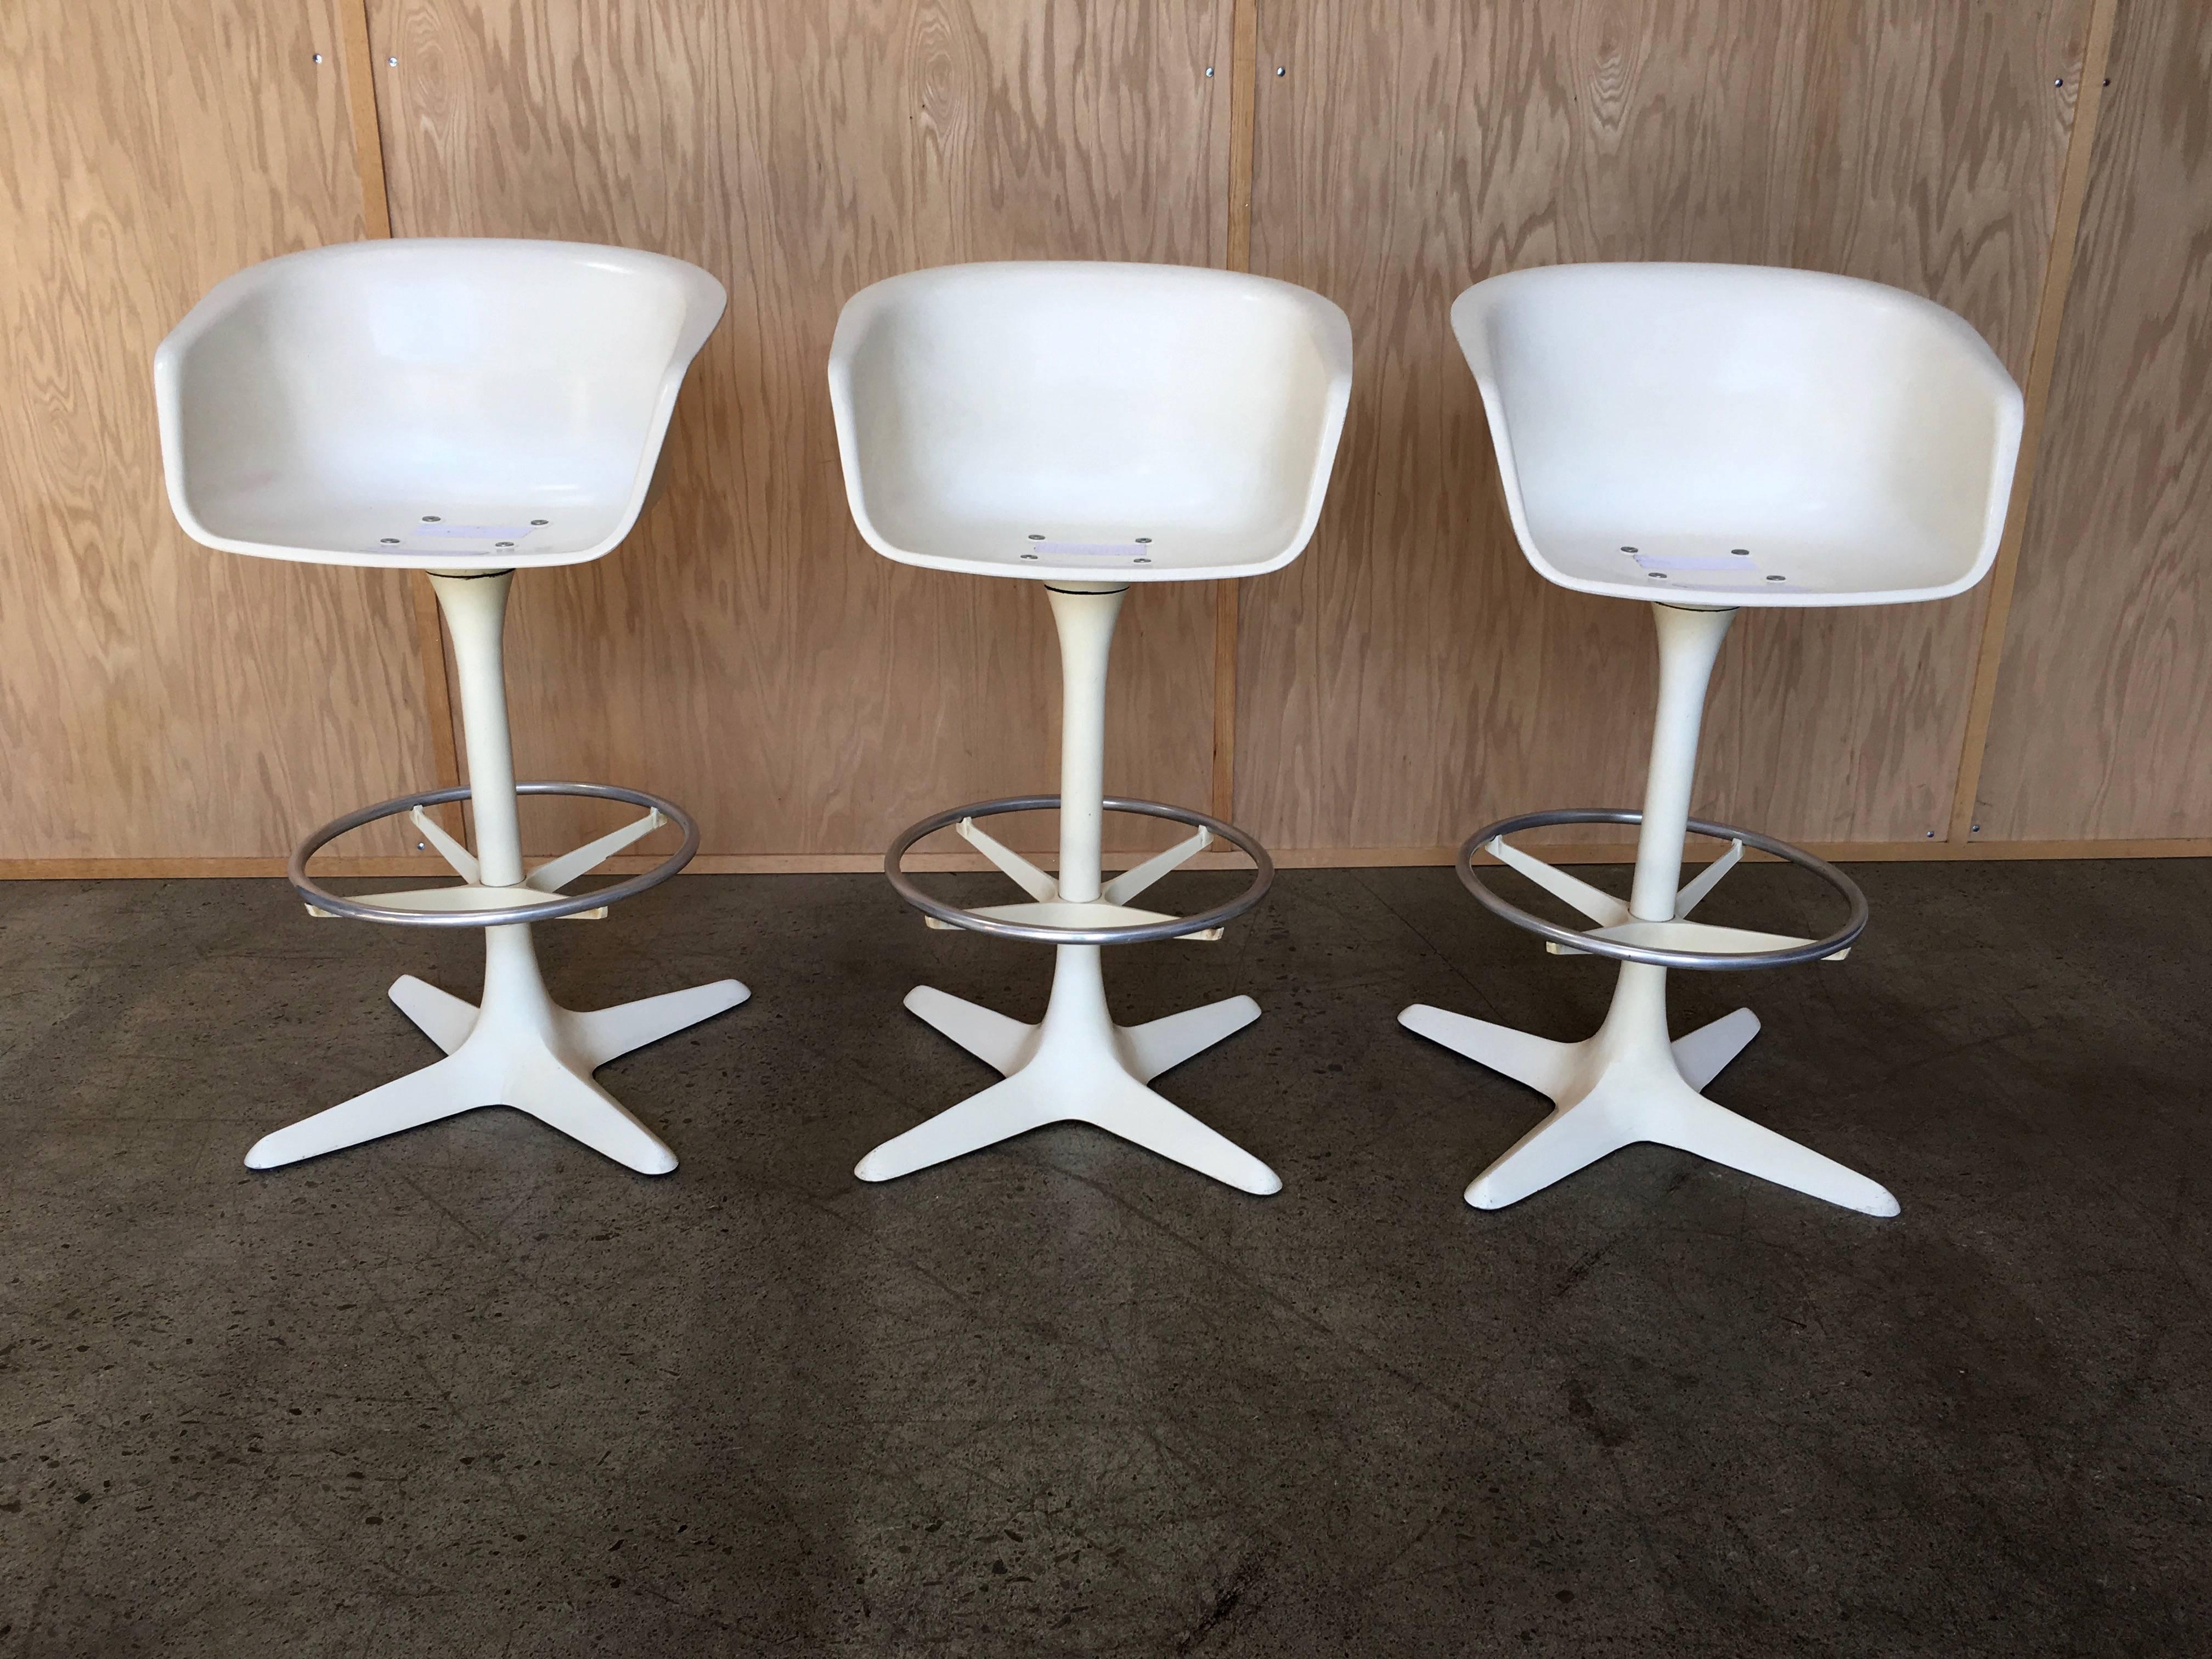 Made by Burke of Dallas a set of three swivel barstools fiberglass seats and powder coated aluminum base seat height is 28.25.